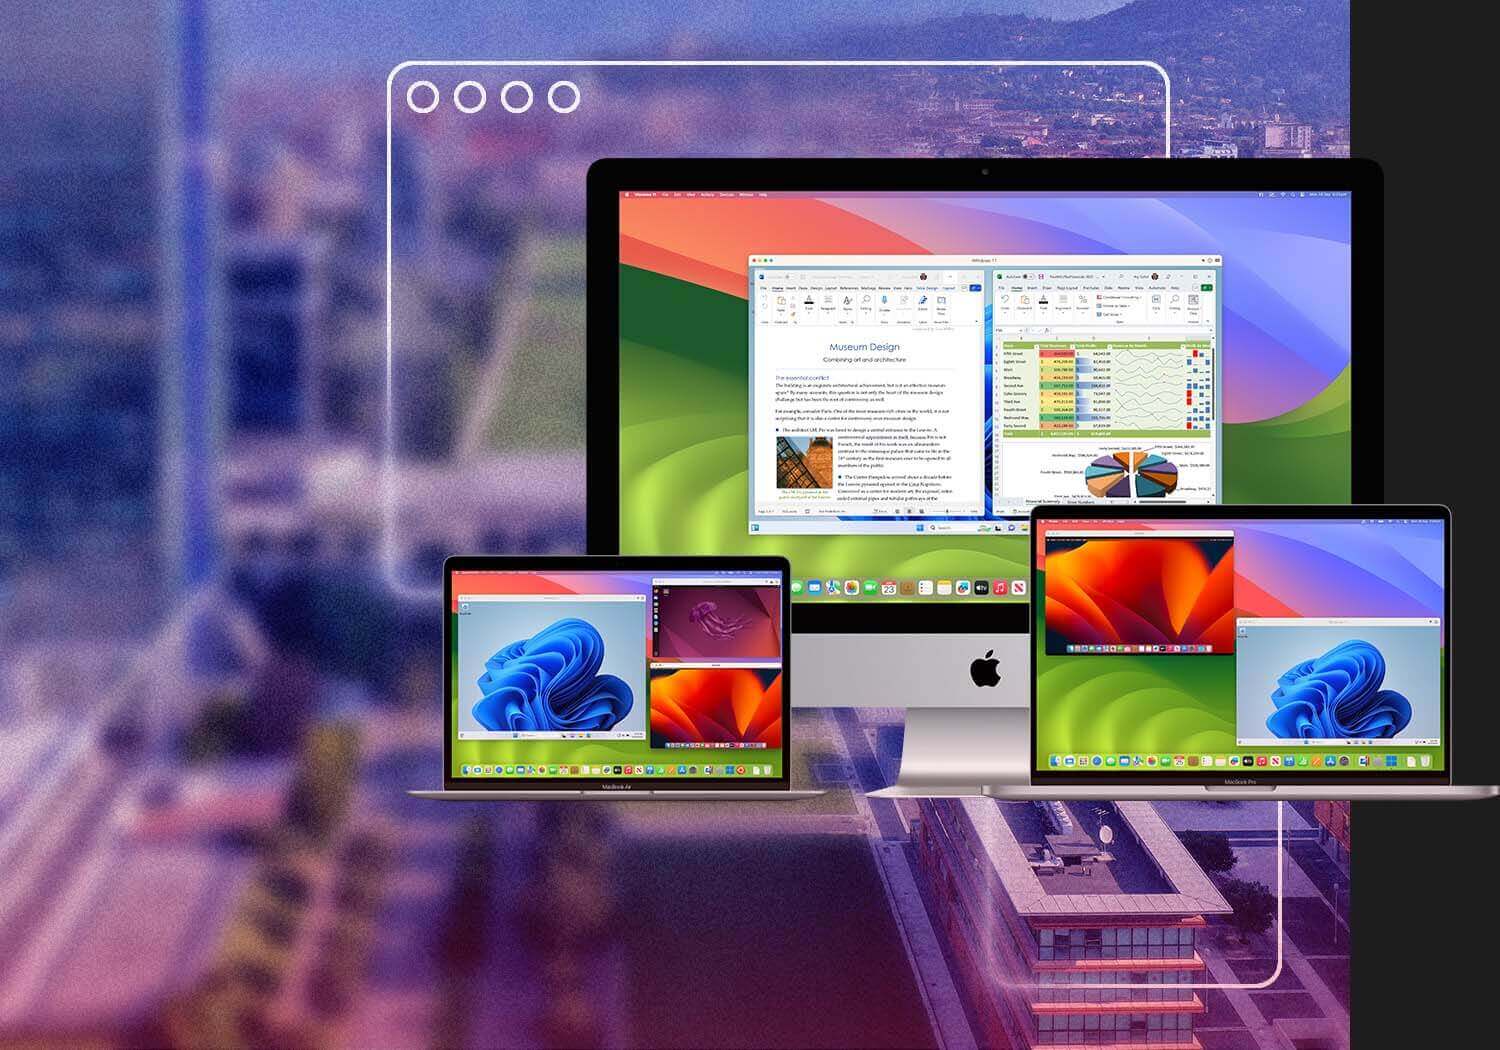 Parallels Desktop 19 download the new version for iphone